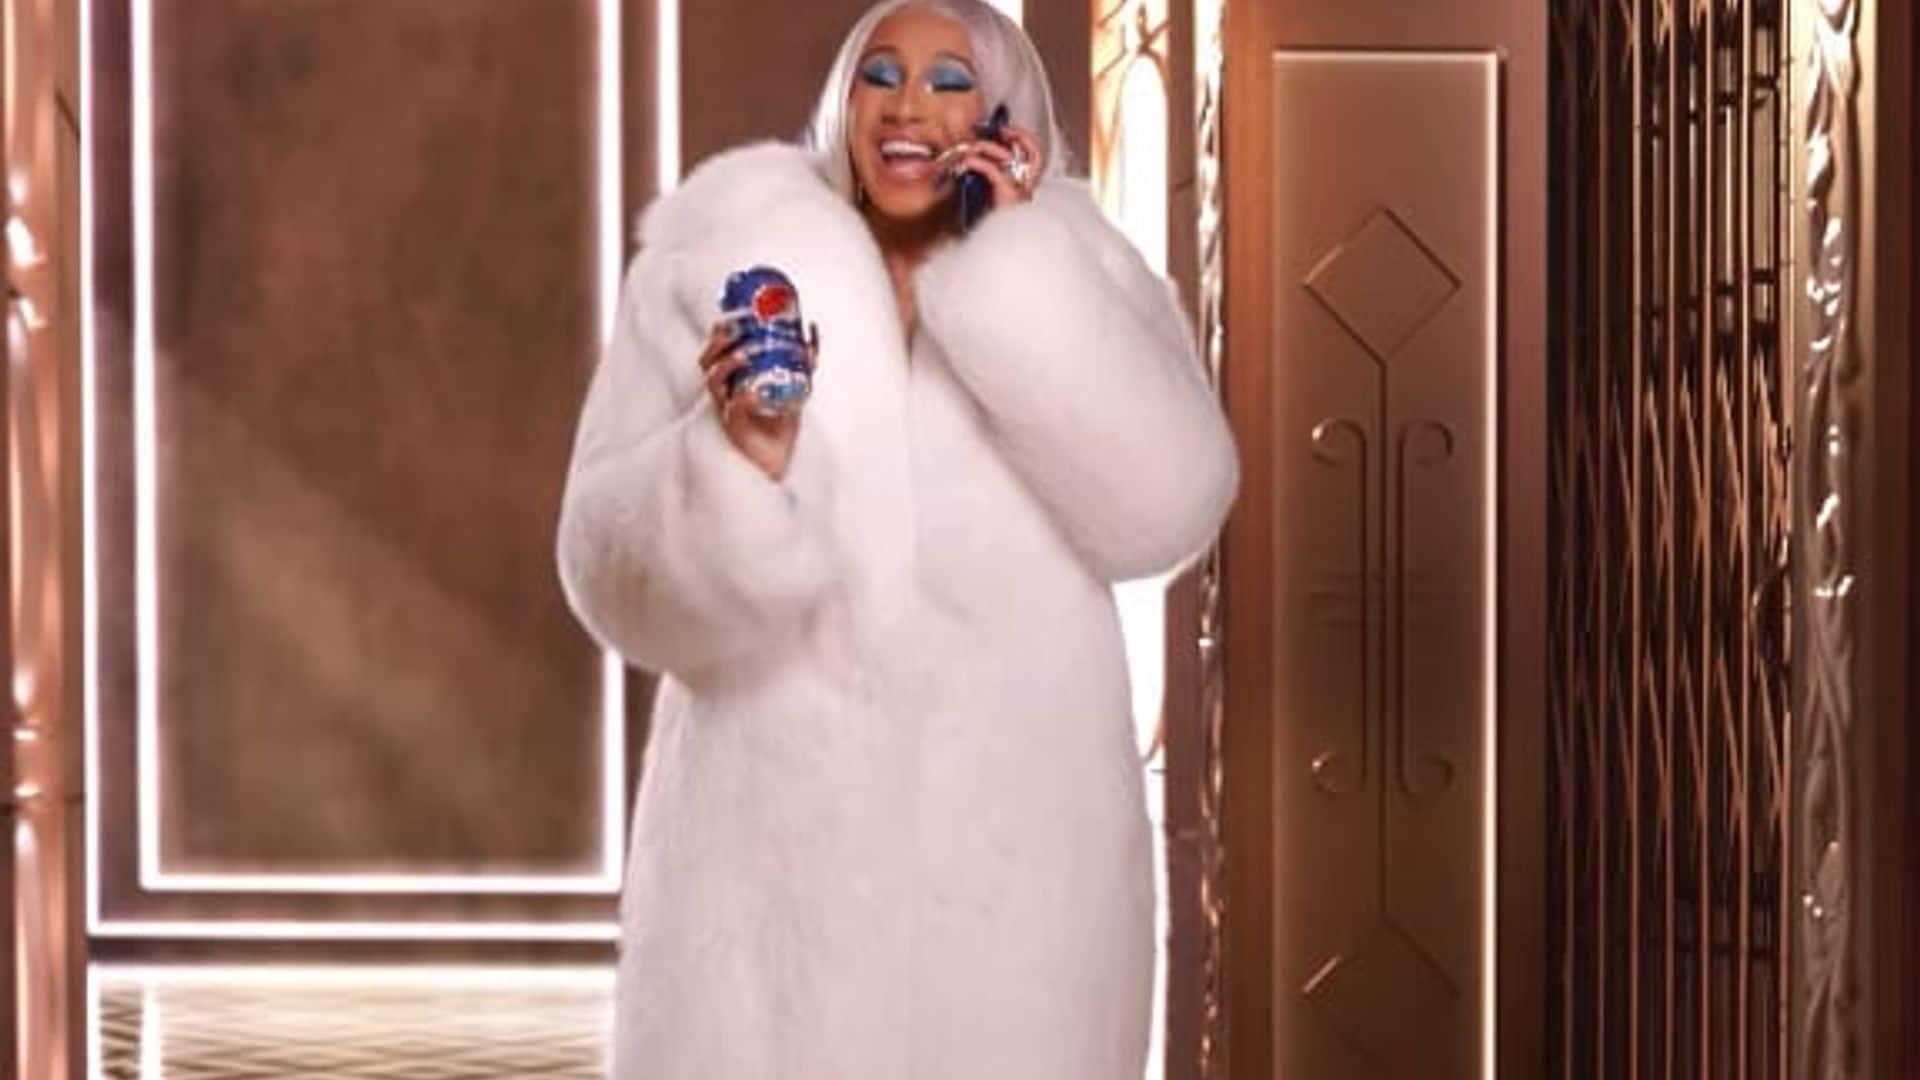 Cardi B channels Santa Claus and passes out her favorite gift in hilarious Pepsi commercial